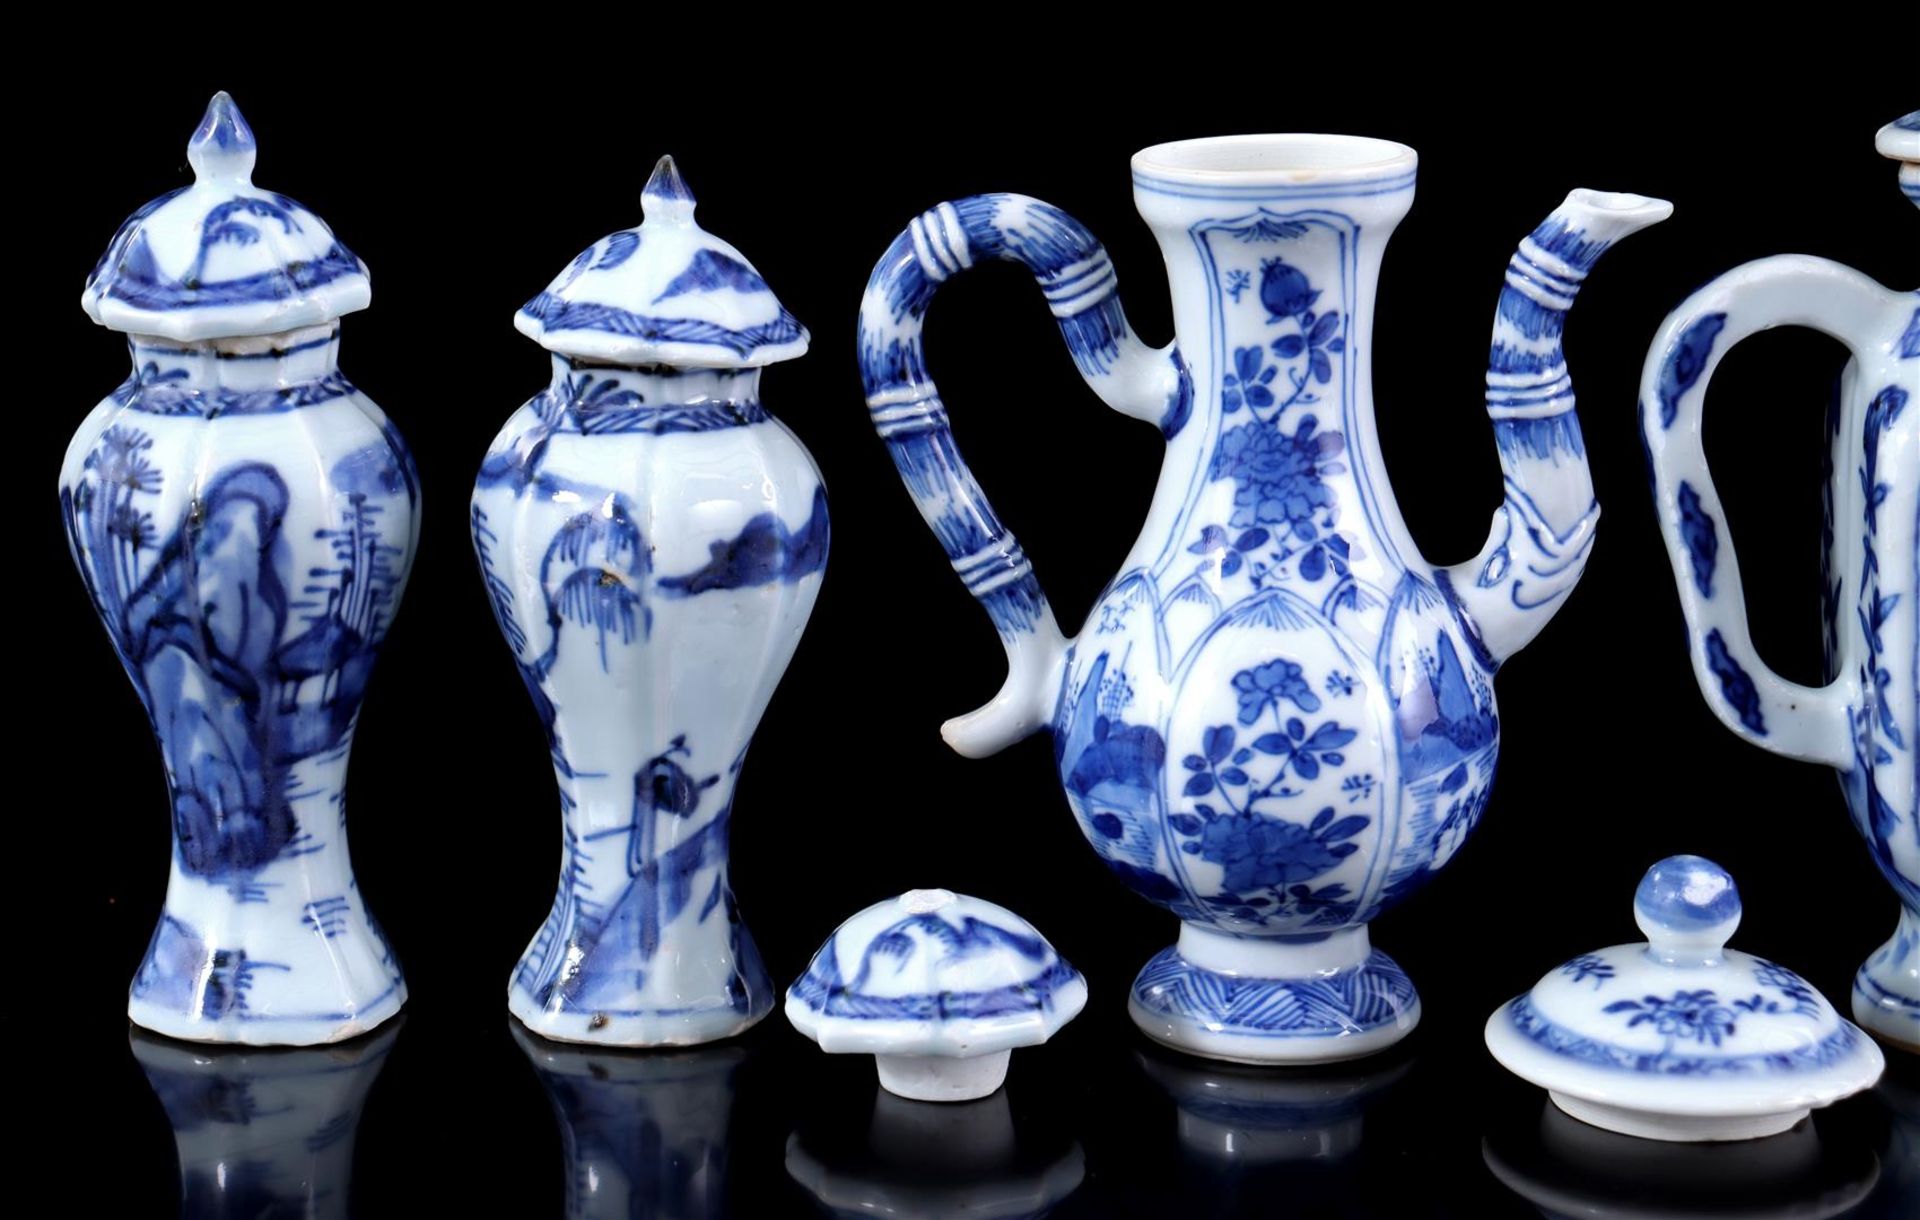 Porcelain miniature jugs, lidded pots and loose lids, China 18th/19th century - Image 2 of 6